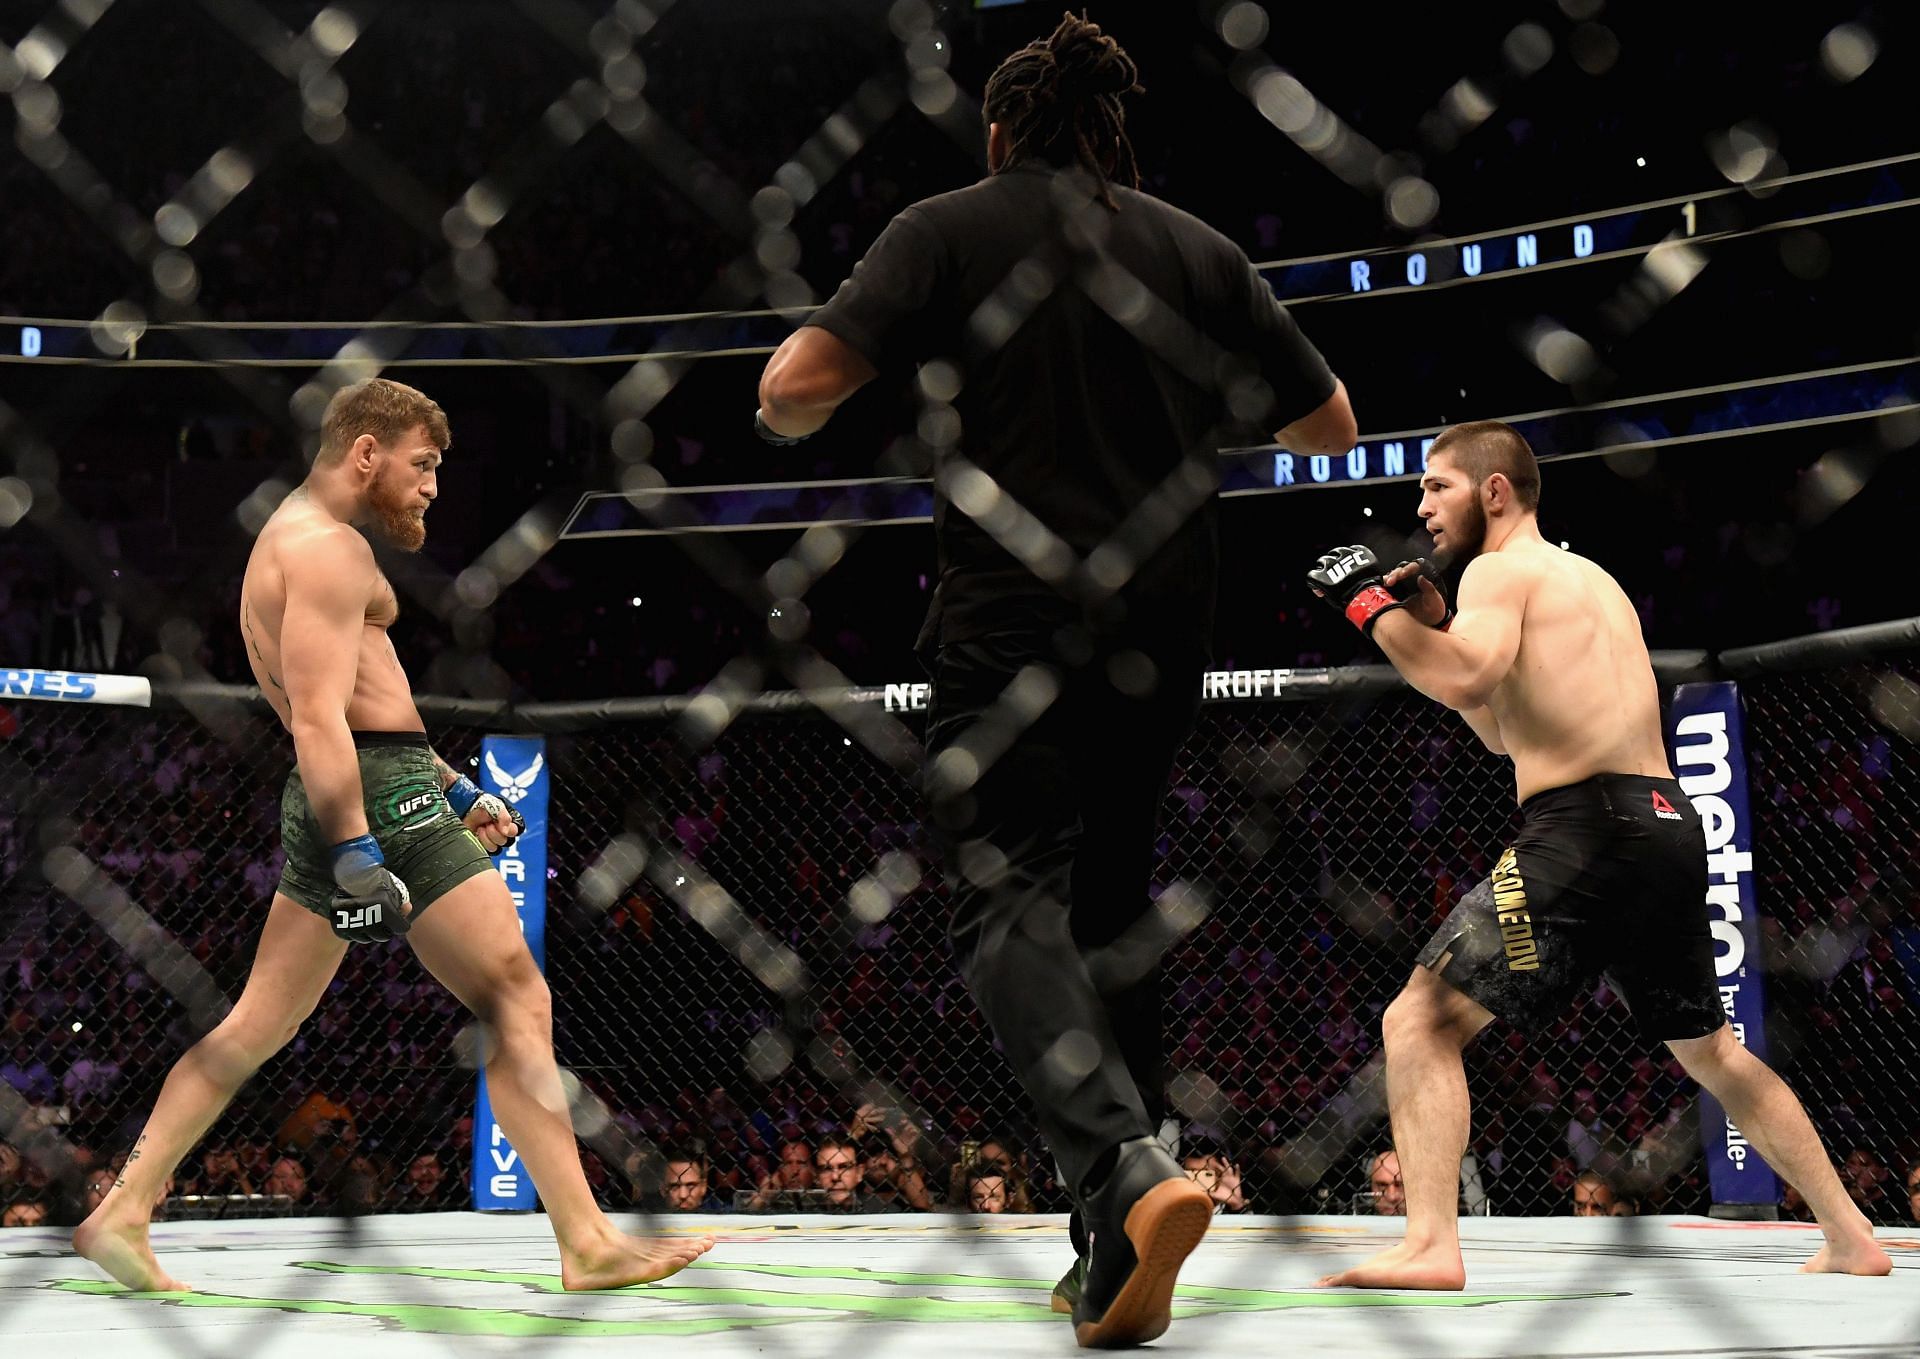 Khabib defeated McGregor in fron of 20,034 fans